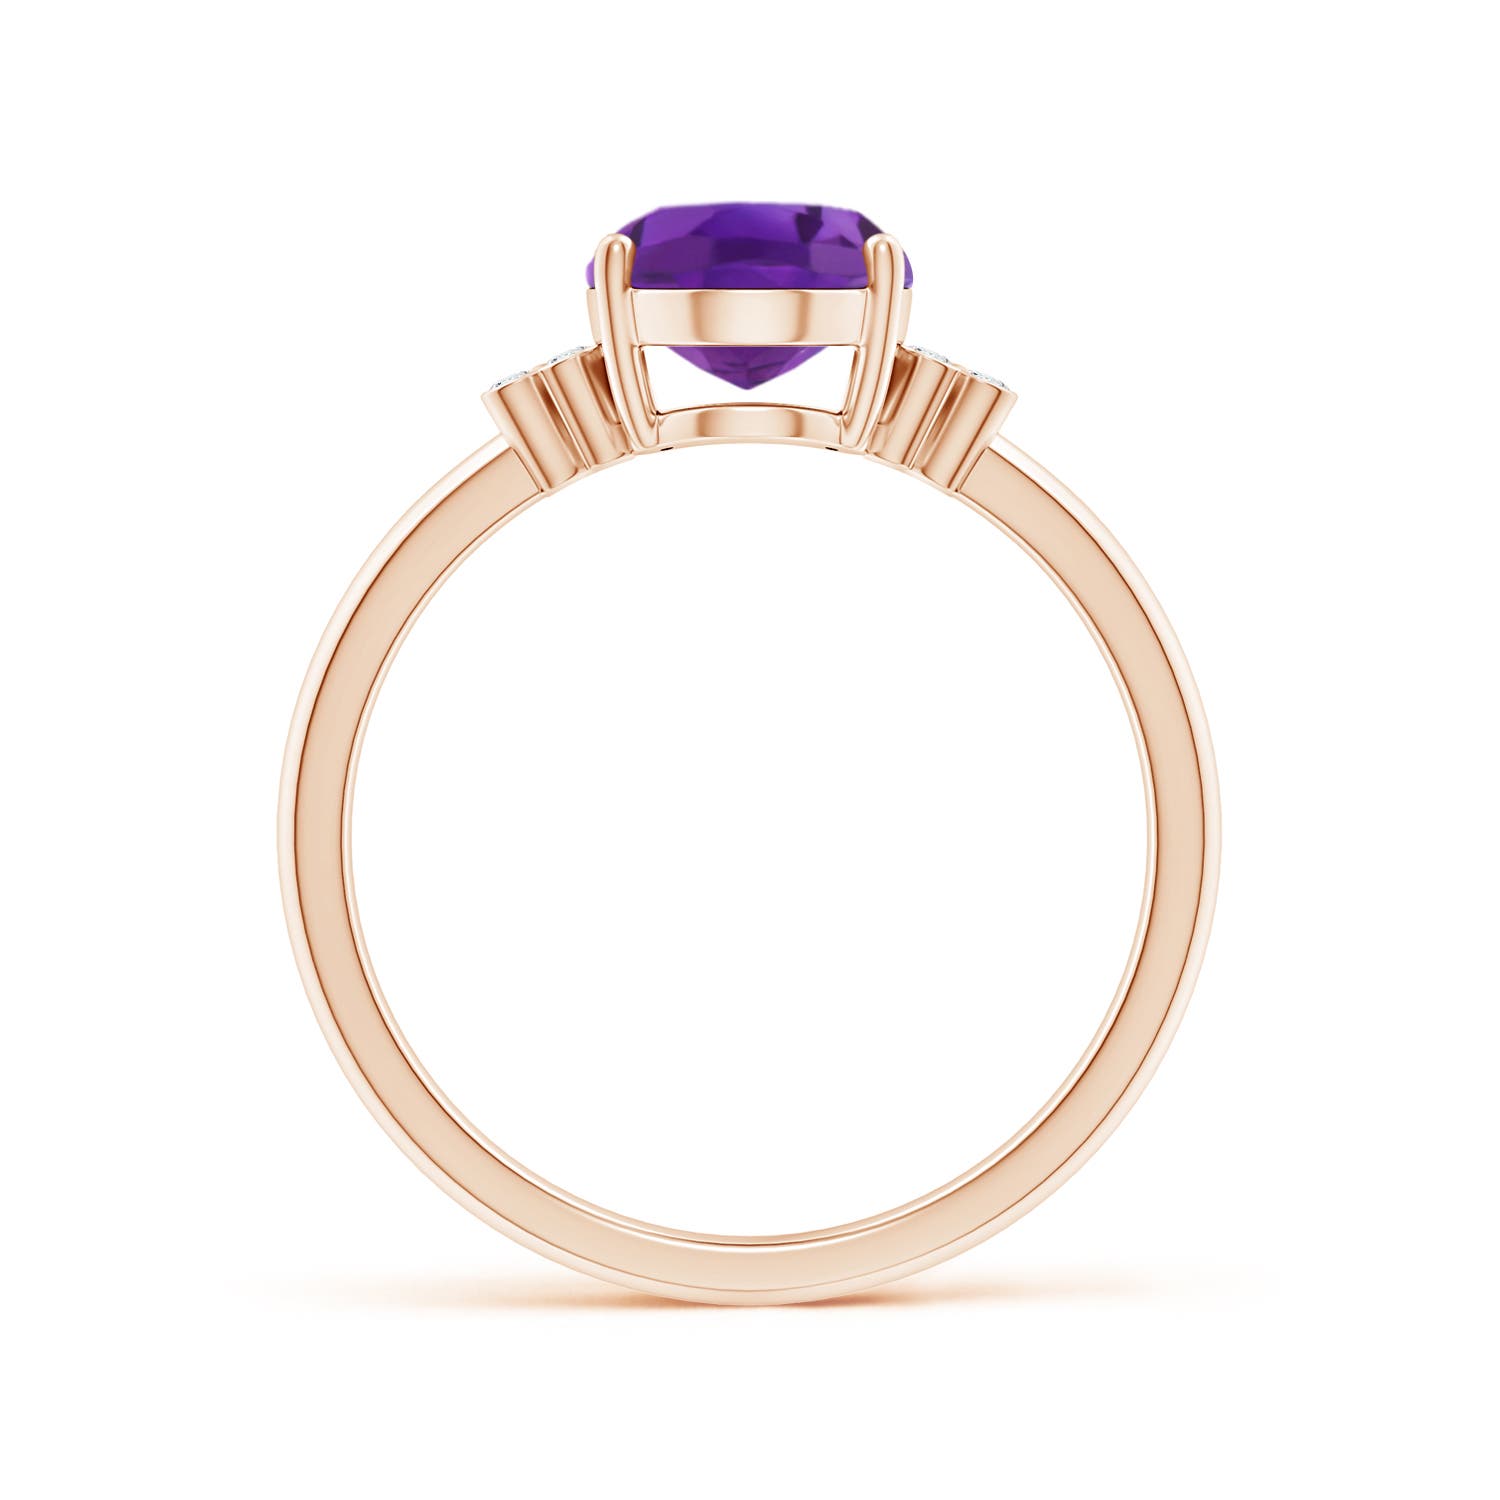 AAA - Amethyst / 1.66 CT / 14 KT Rose Gold